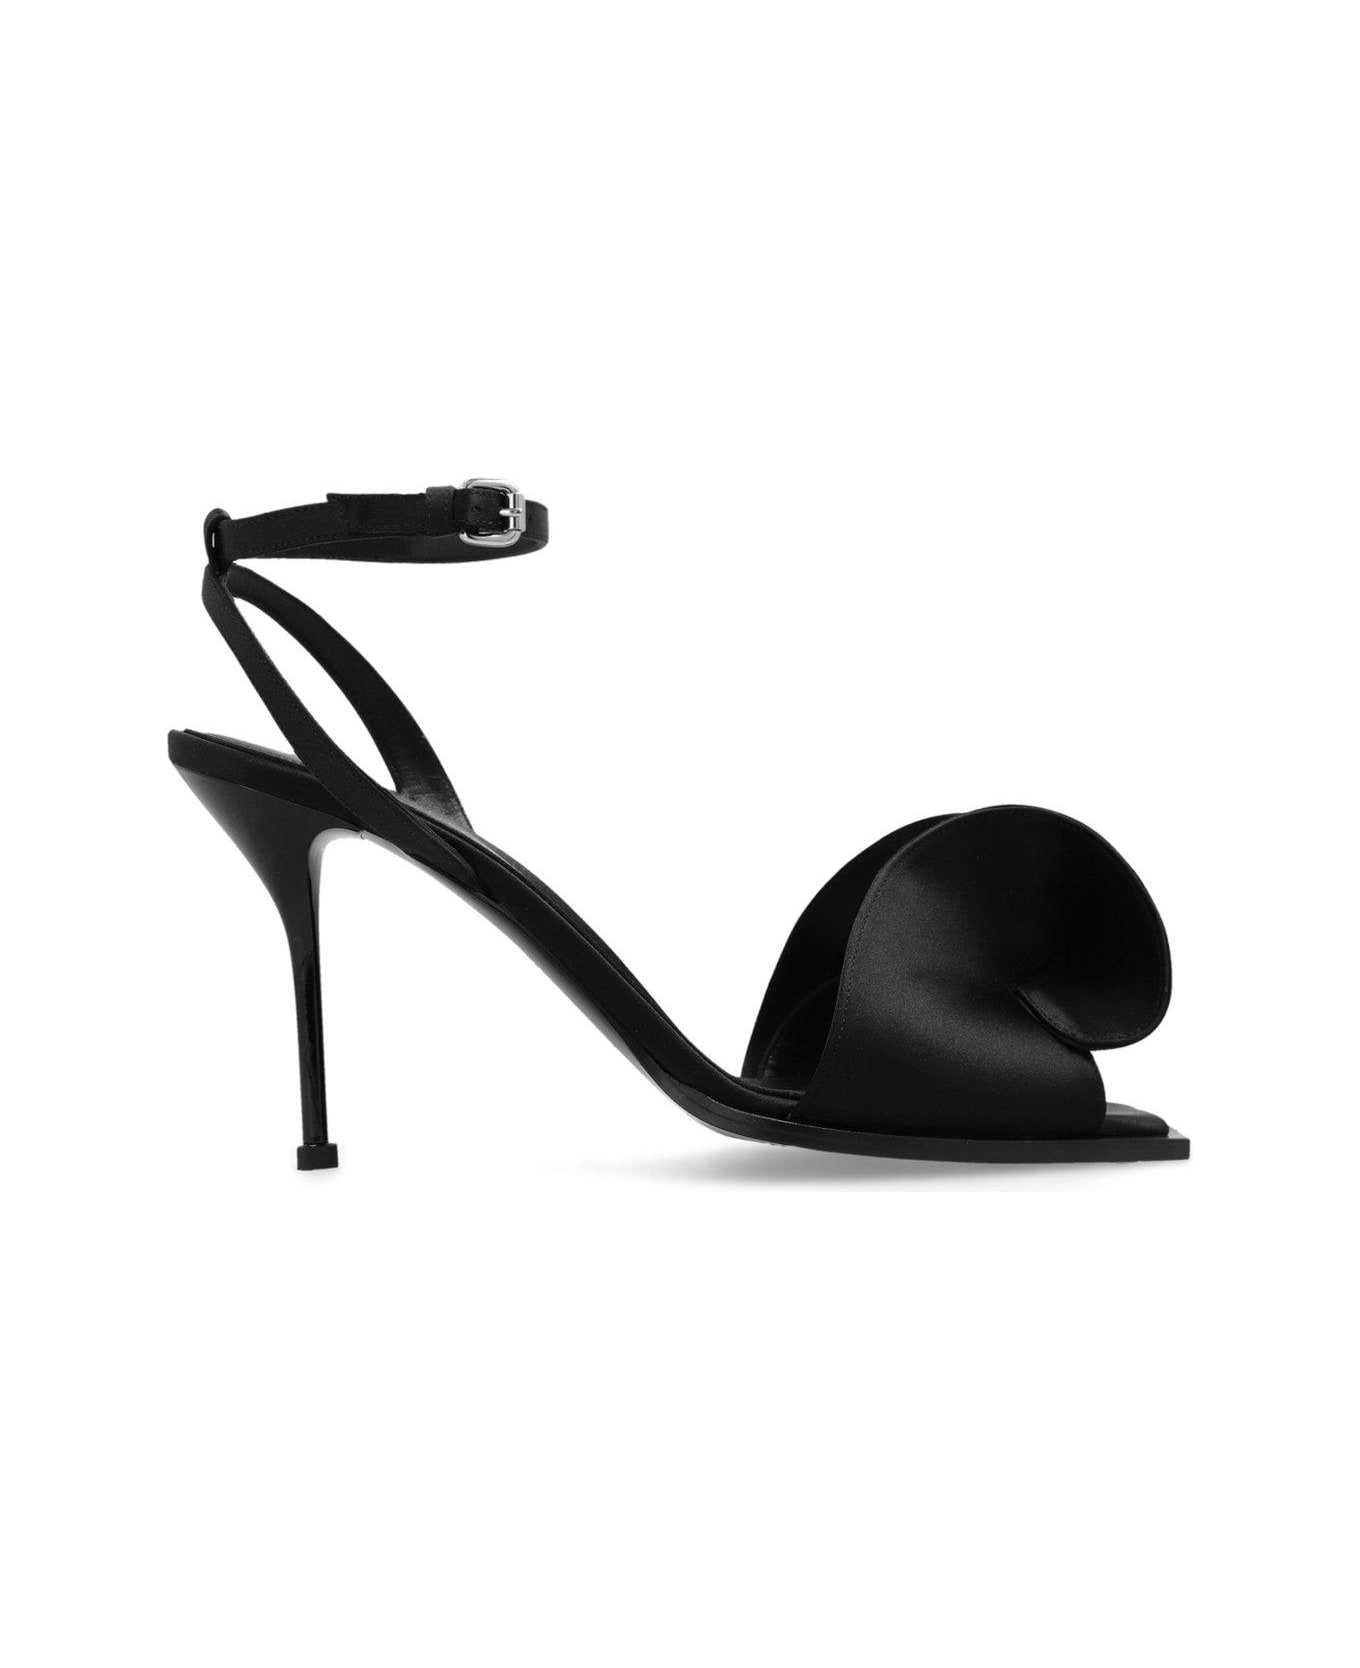 Alexander McQueen Ankle-strapped Heeled Sandals - Black